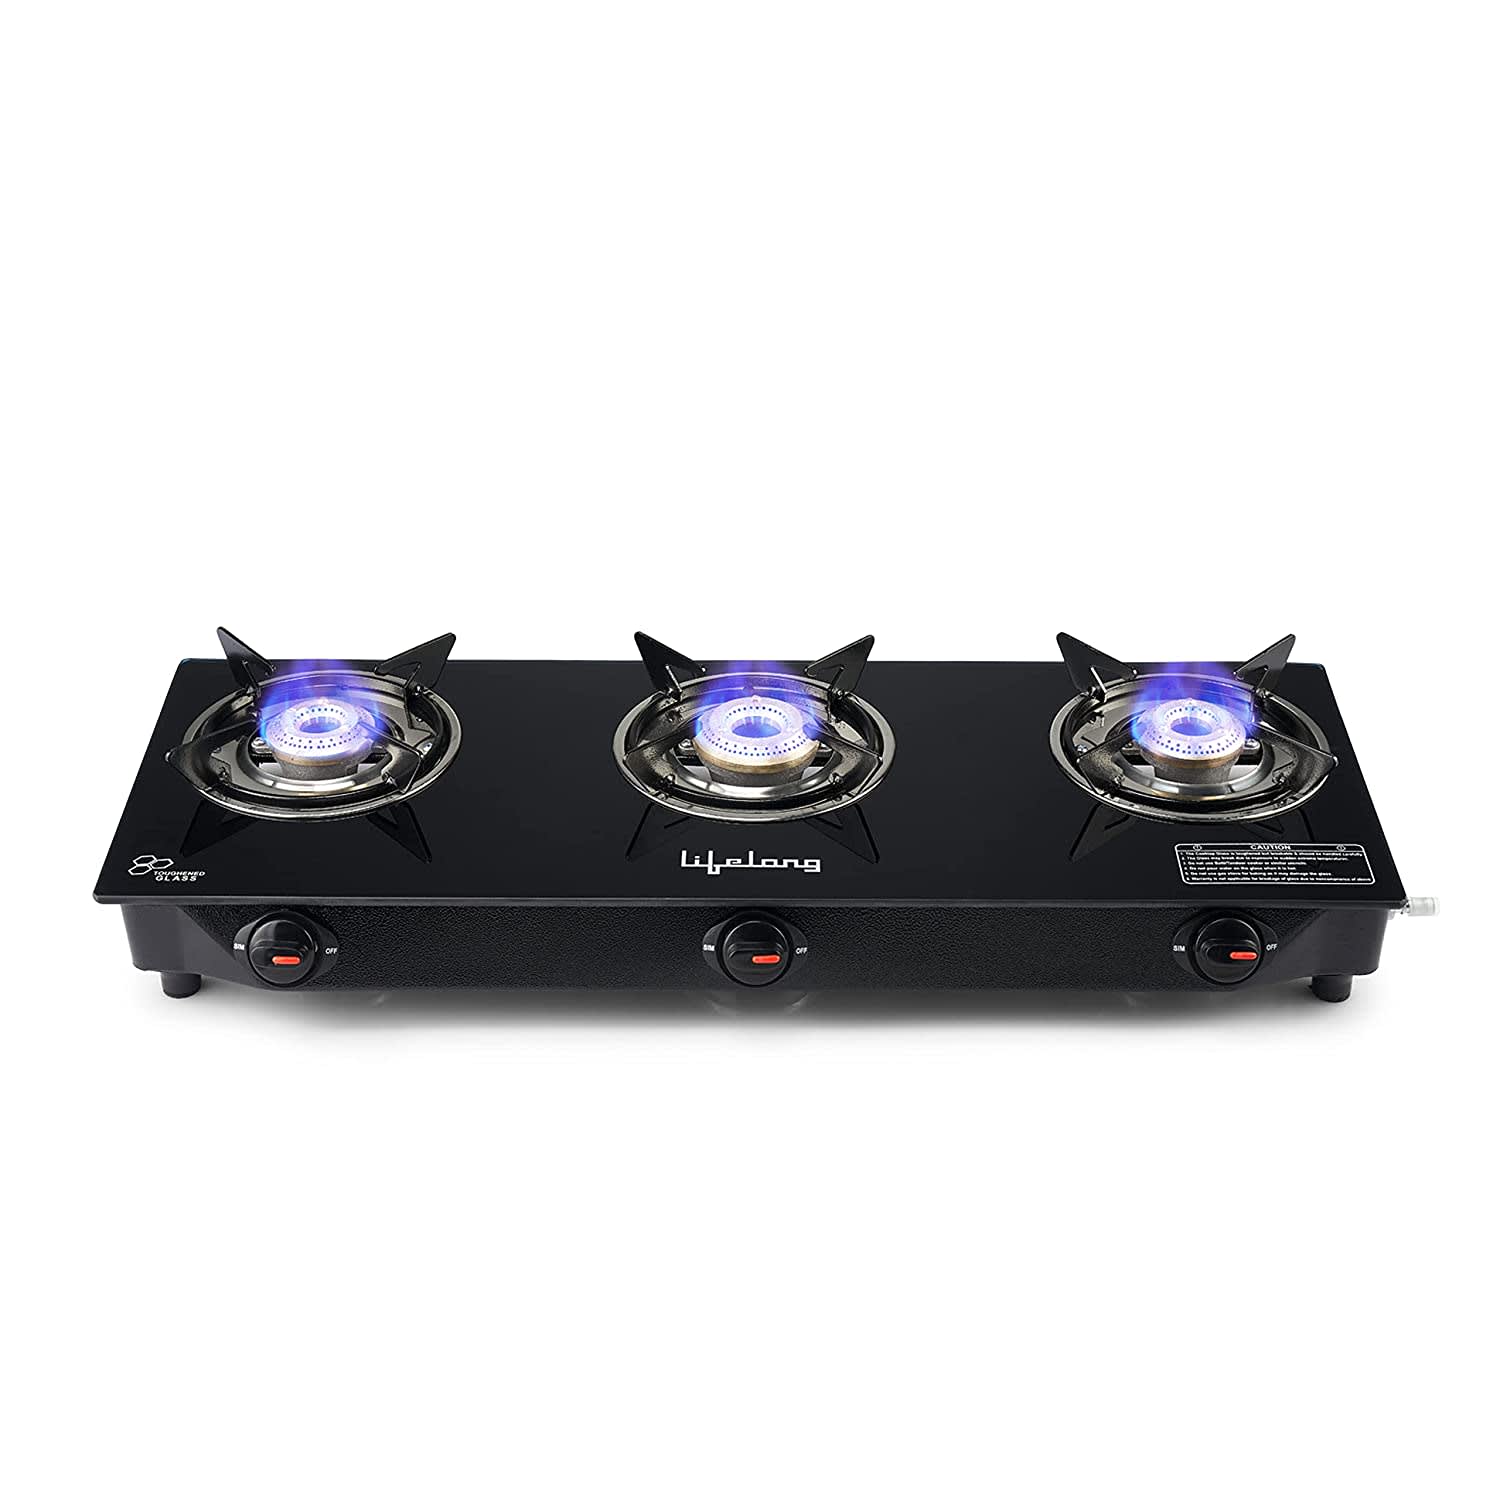 Lifelong LLGS930 Manual Ignition, High Efficiency 3 Burner Gas Stove with Toughened Glass Top, ISI Certified, For LPG Use (1 Year Warranty, Doorstep Service, Black)